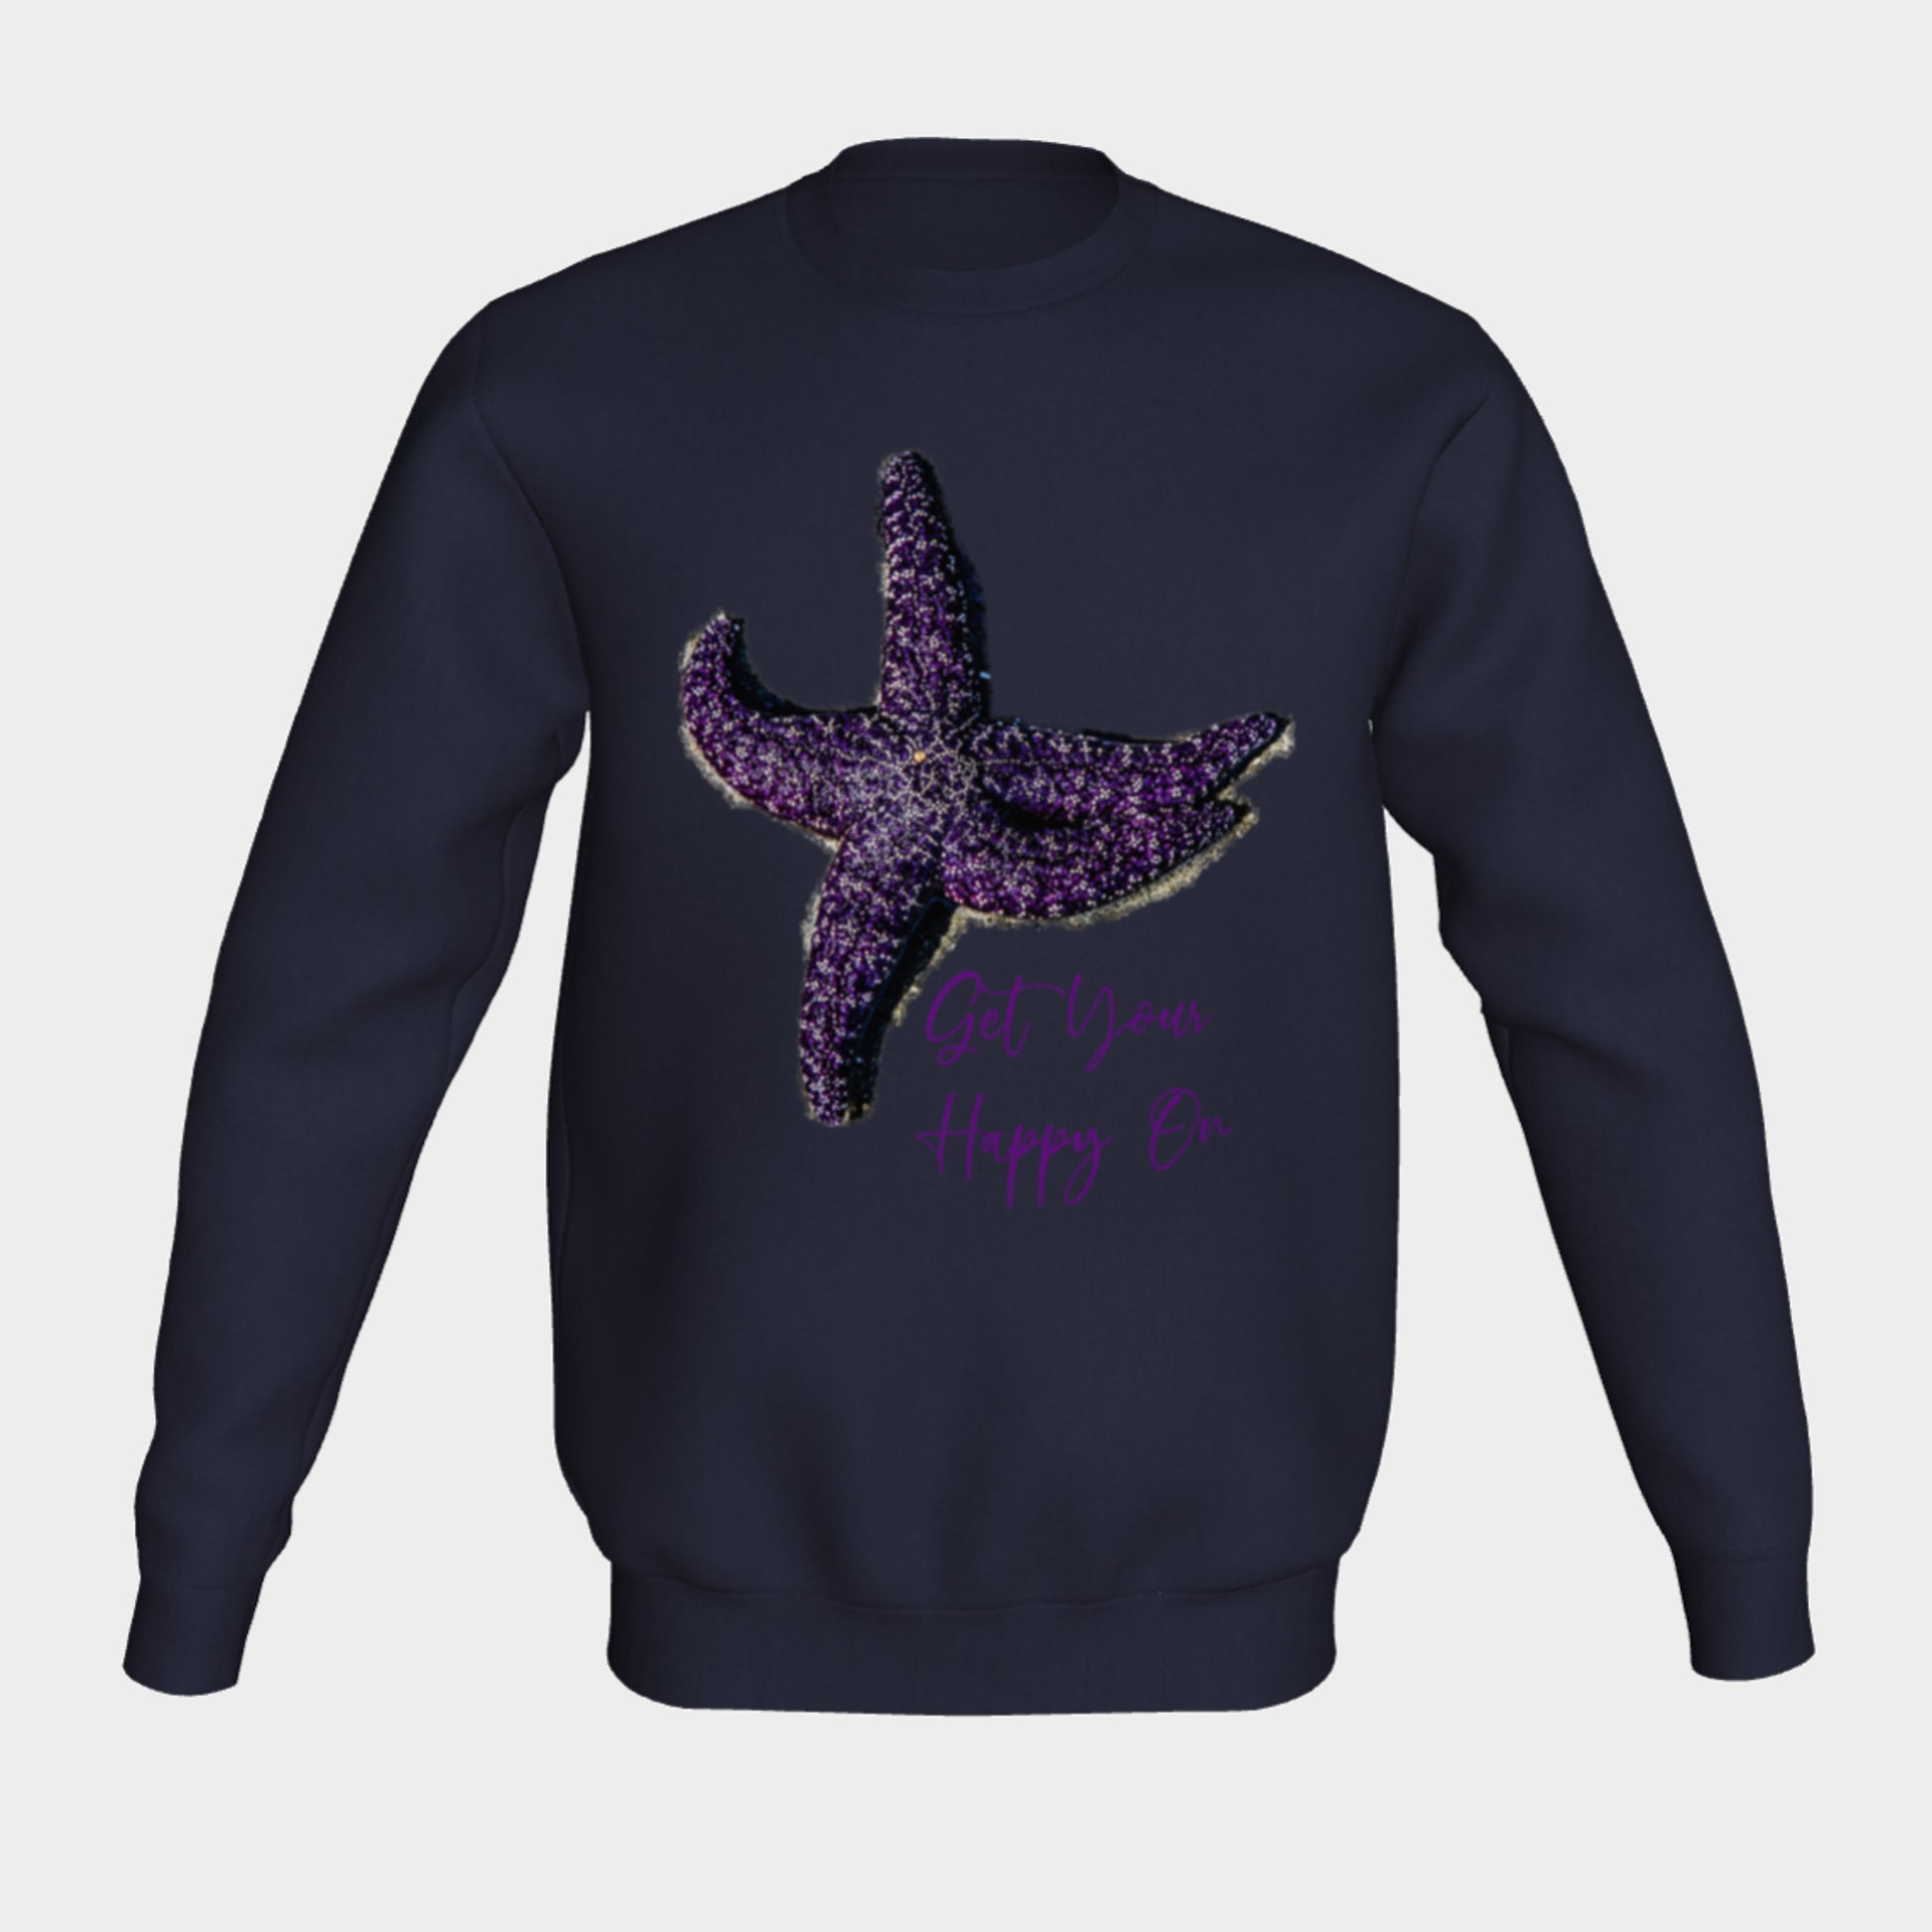 Get Your Happy On Starfish Unisex Crewneck Sweatshirt What’s better than a super cozy sweatshirt? A super cozy sweatshirt from Van Isle Goddess!  Super cozy unisex sweatshirt for those chilly days.  Excellent for men or women.   Fit is roomy and comfortable. 